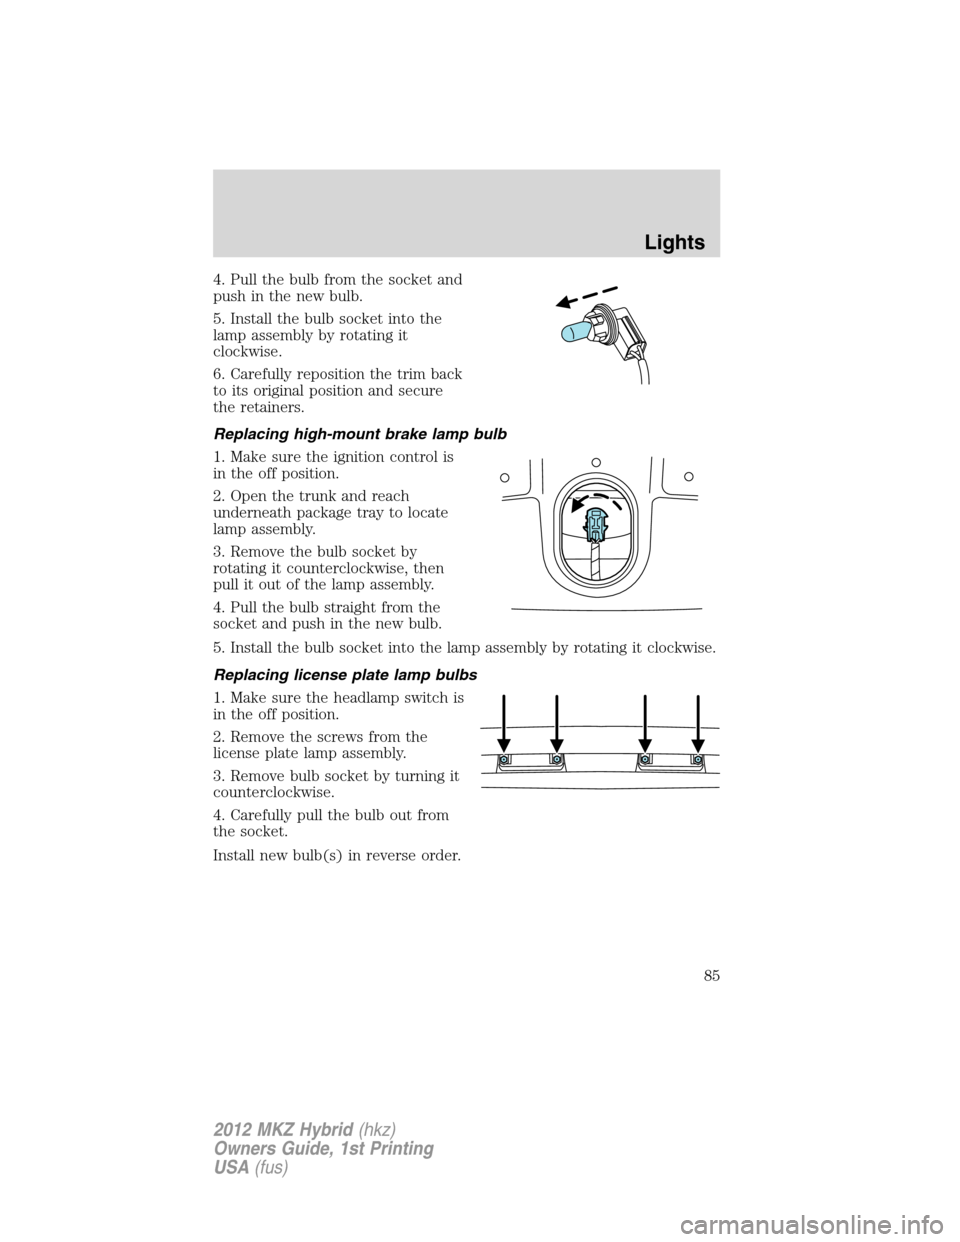 LINCOLN MKZ HYBRID 2012  Owners Manual 4. Pull the bulb from the socket and
push in the new bulb.
5. Install the bulb socket into the
lamp assembly by rotating it
clockwise.
6. Carefully reposition the trim back
to its original position an